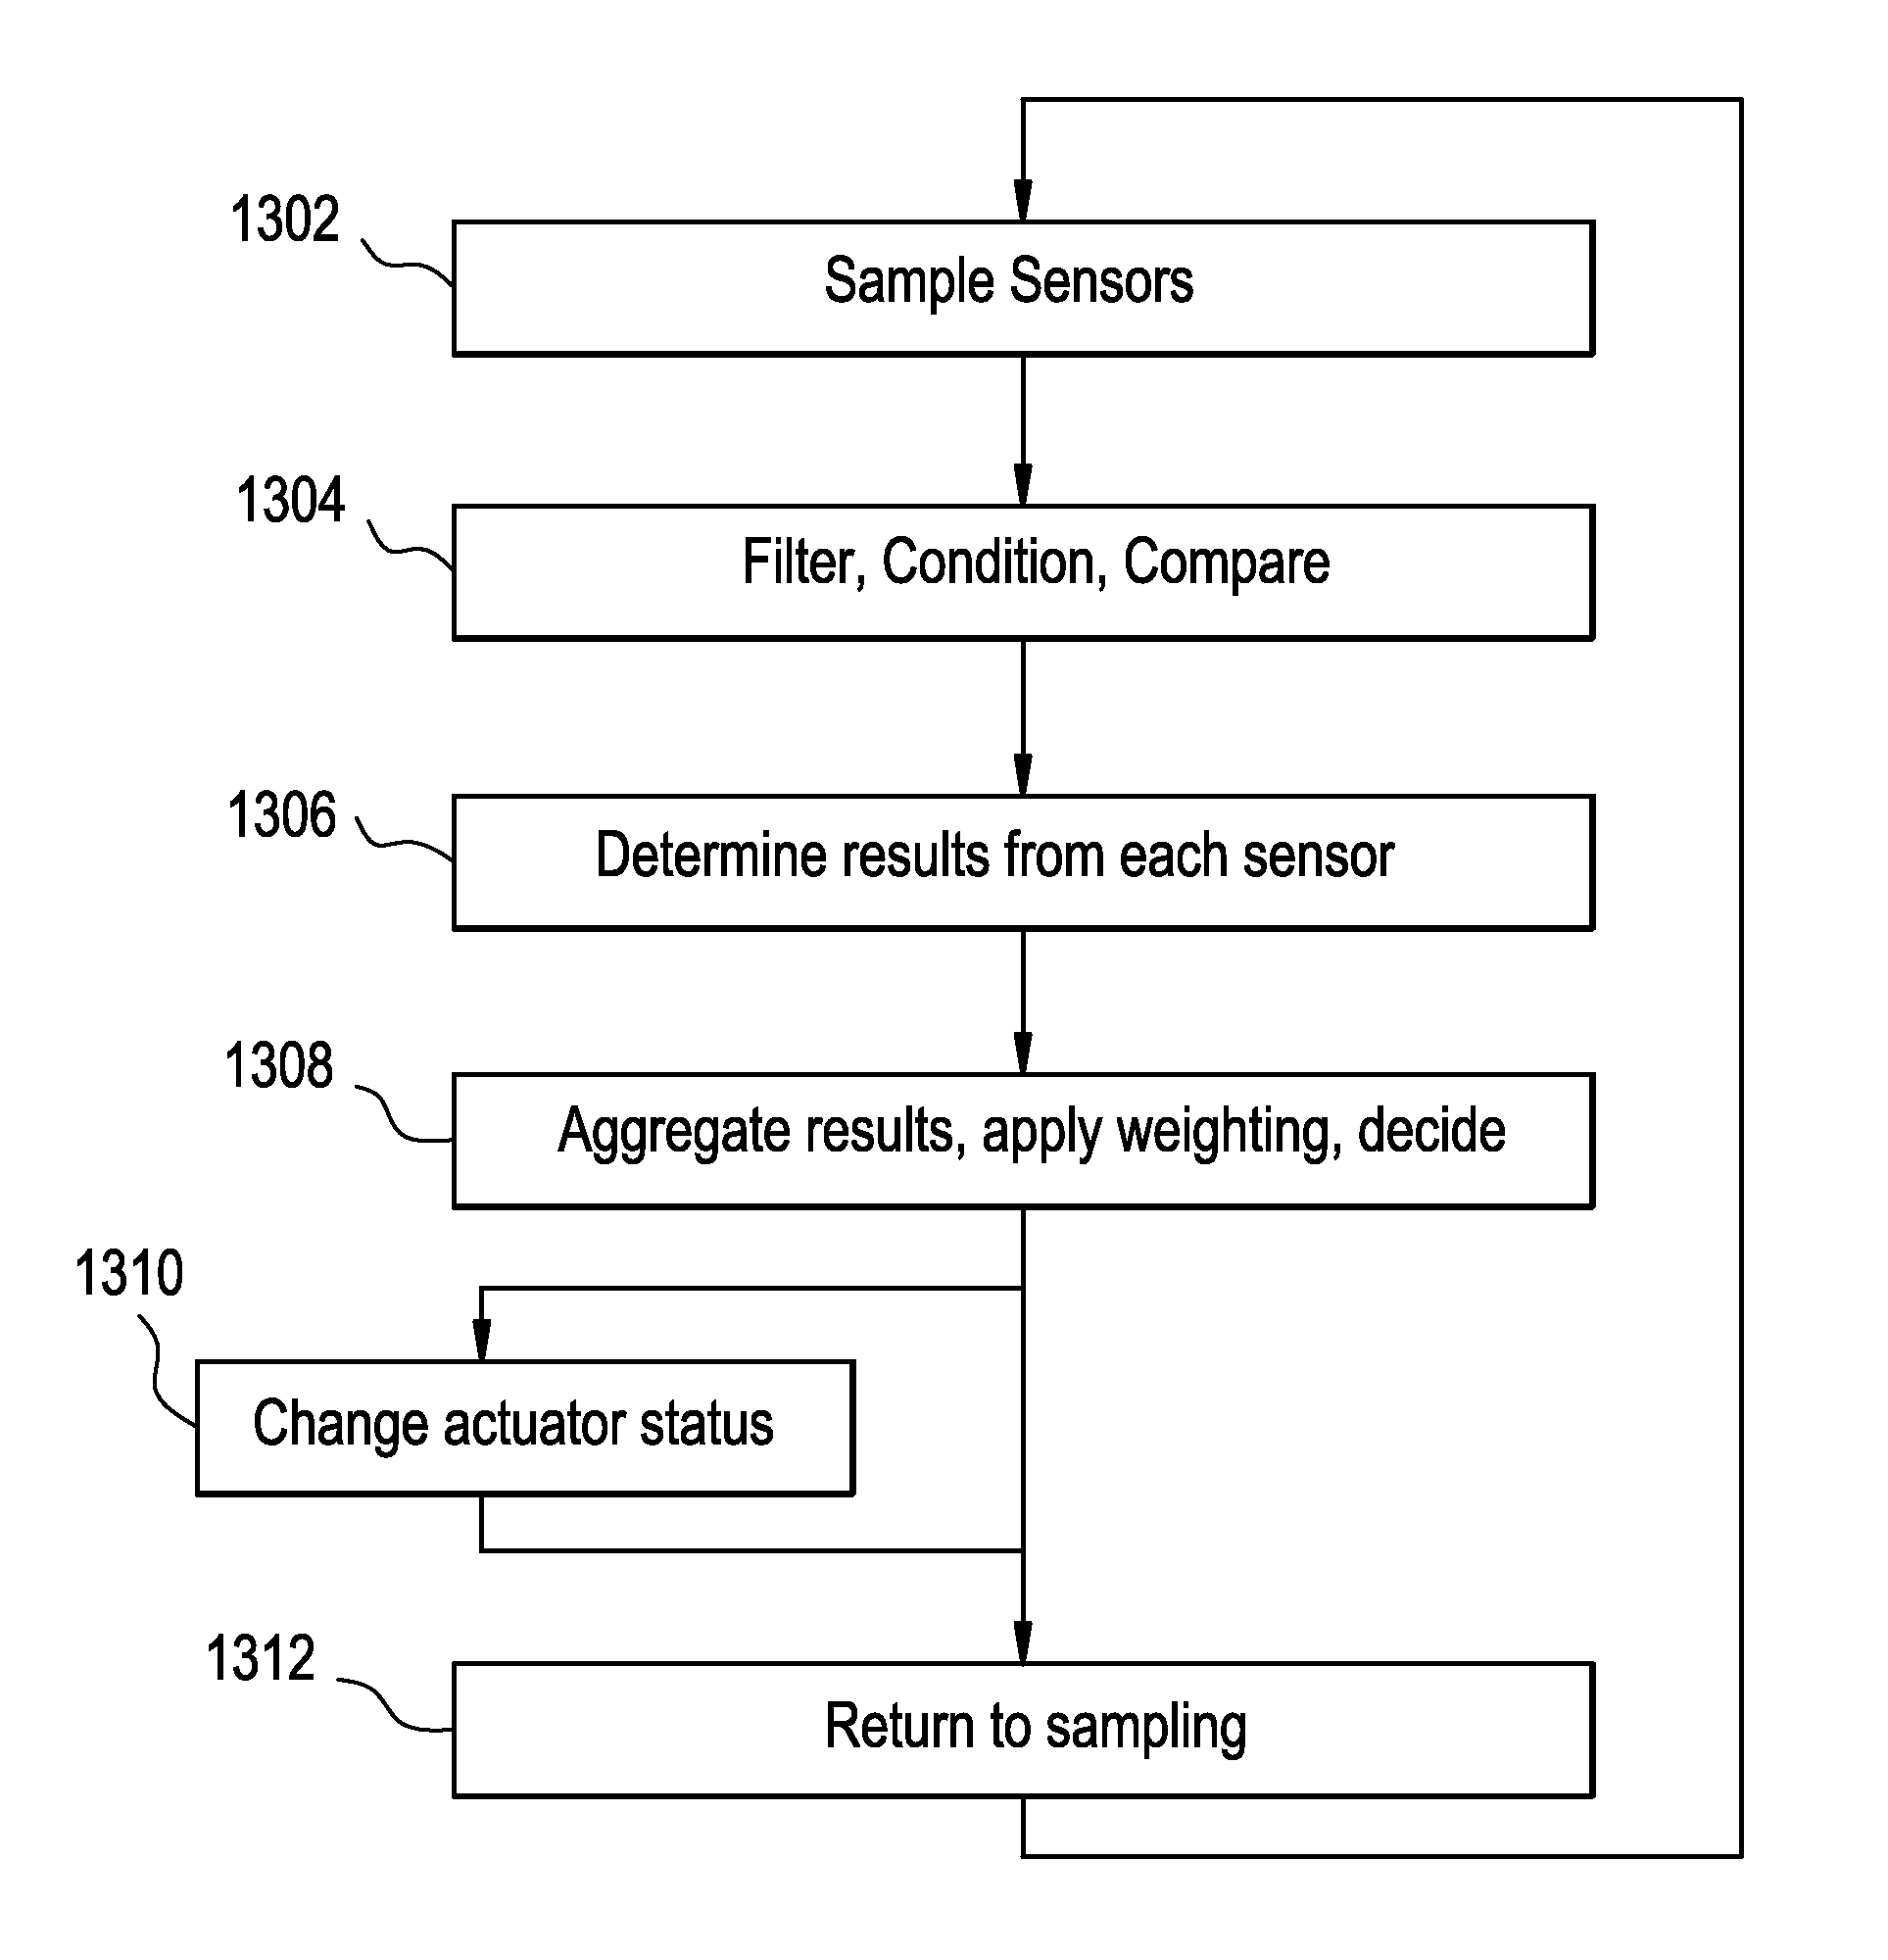 Electronic ophthalmic lens with multi-input voting scheme